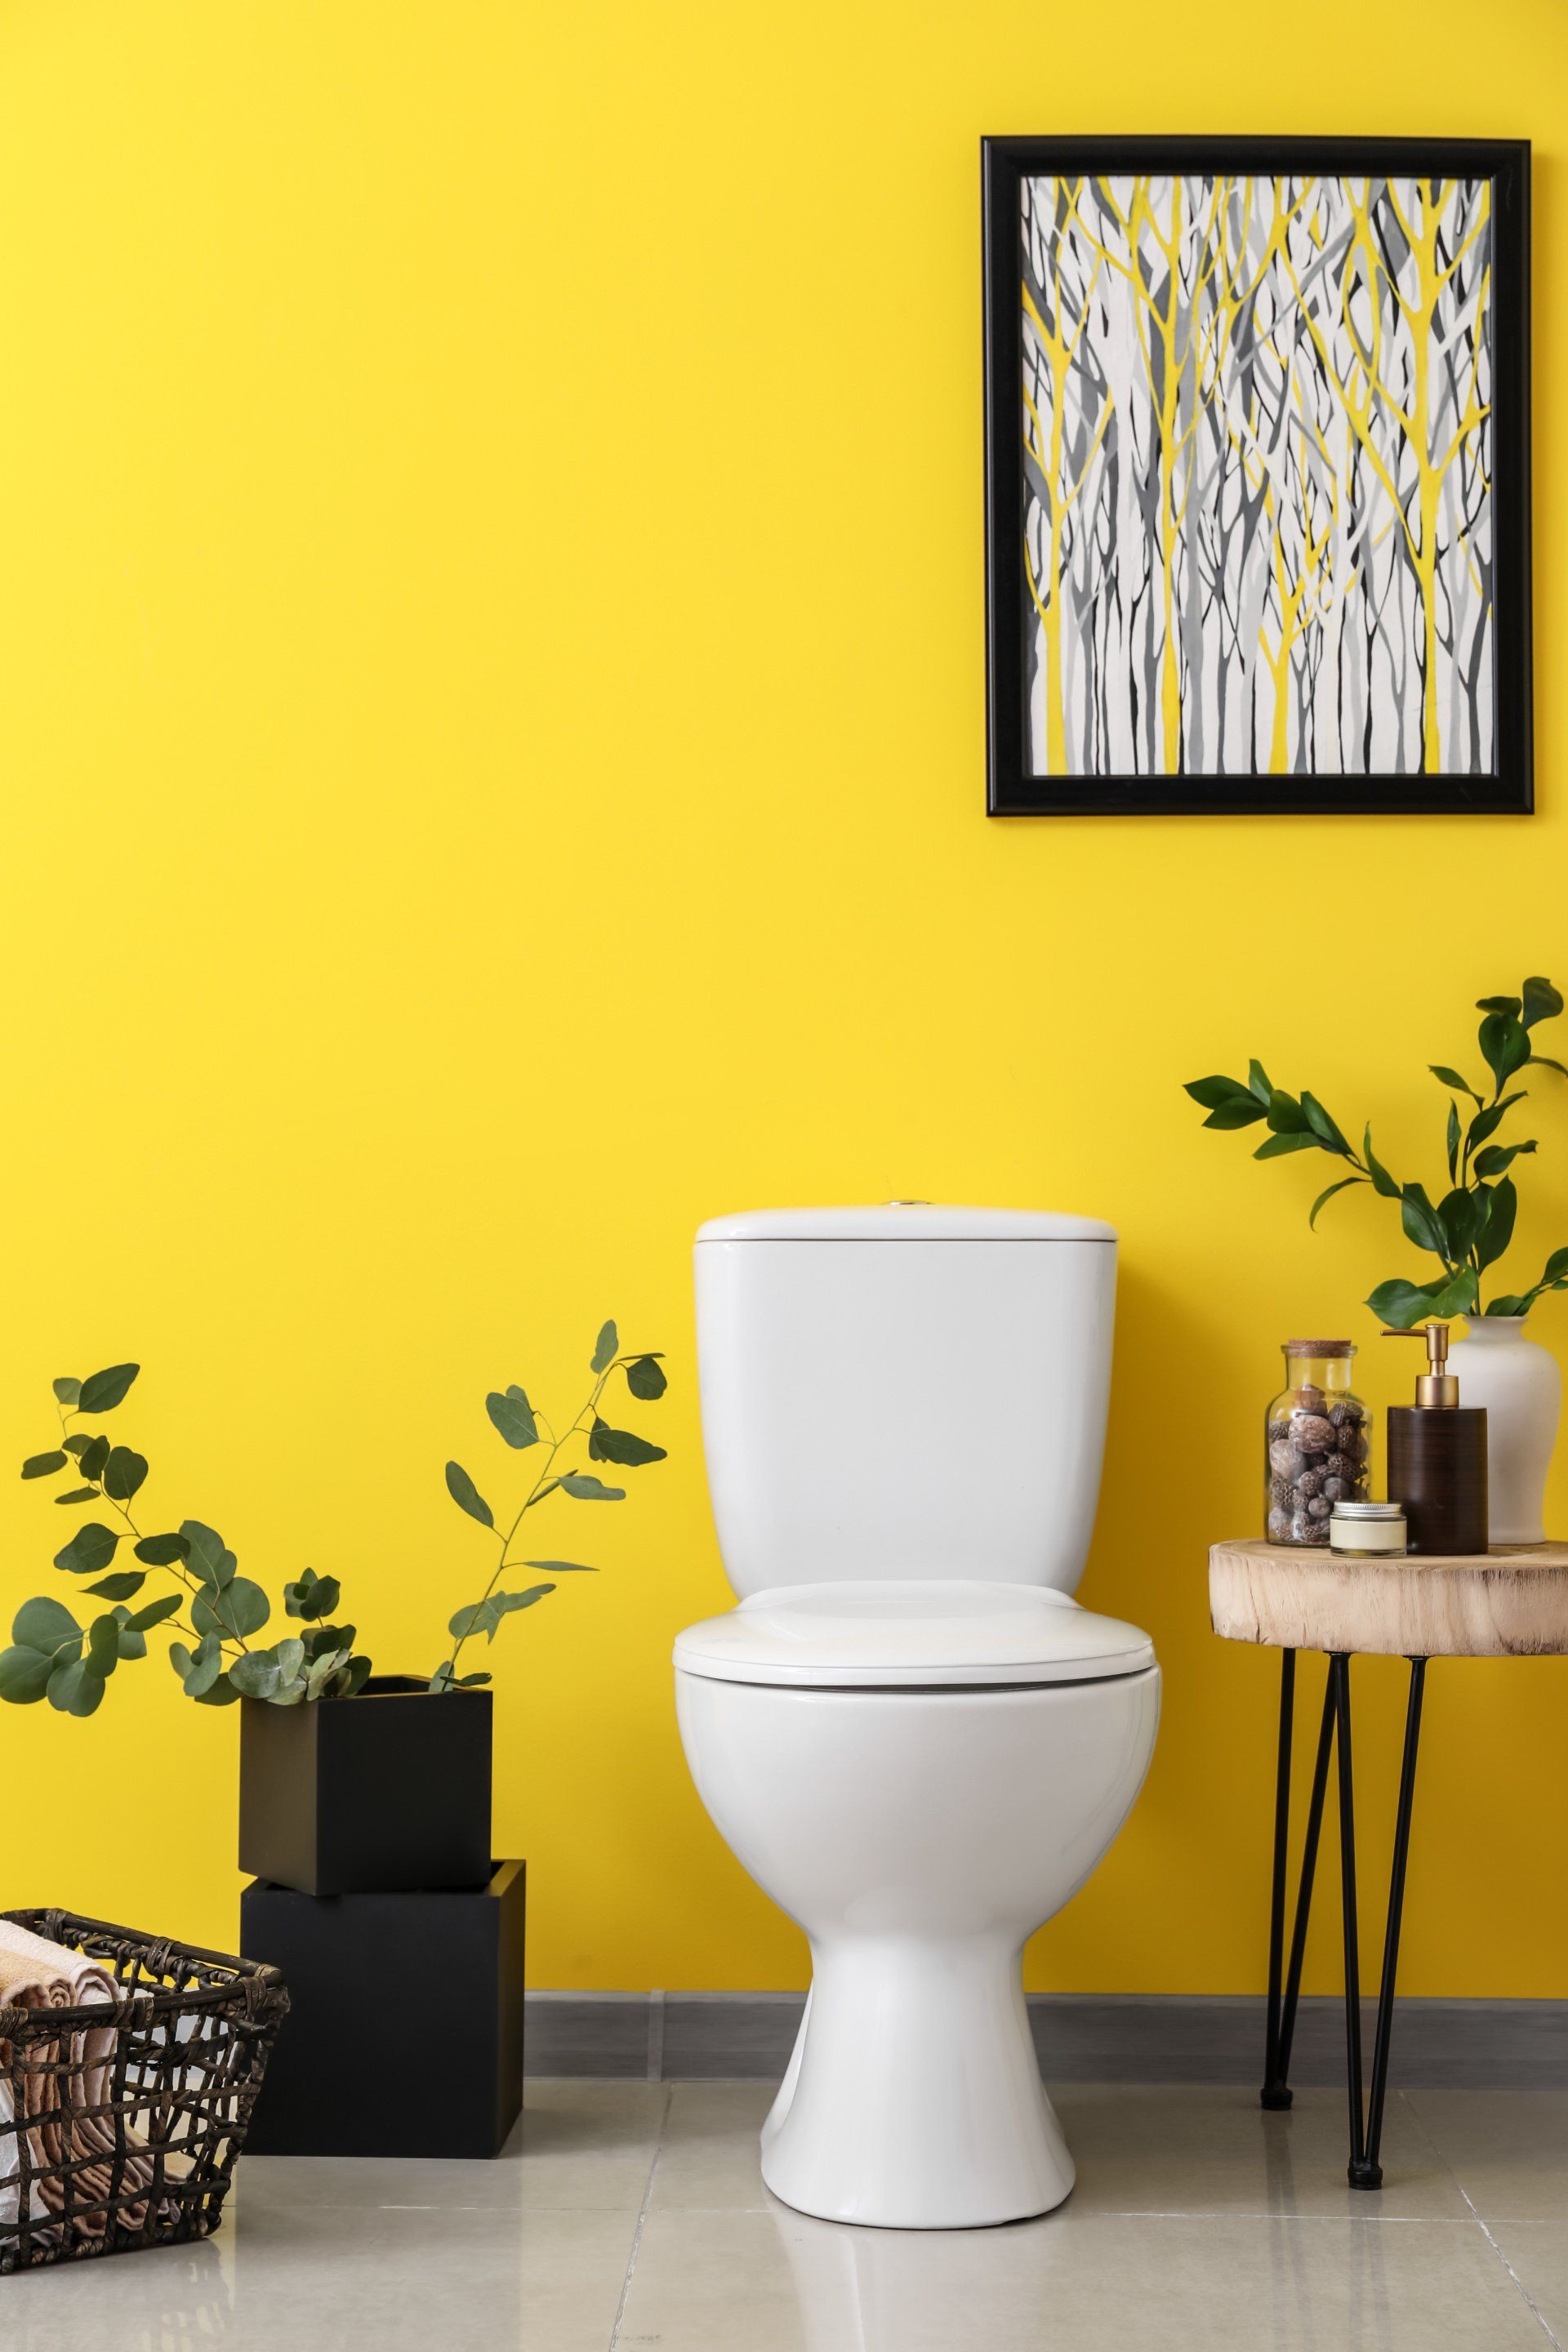 a bathroom with plants, a toilet and yellow walls